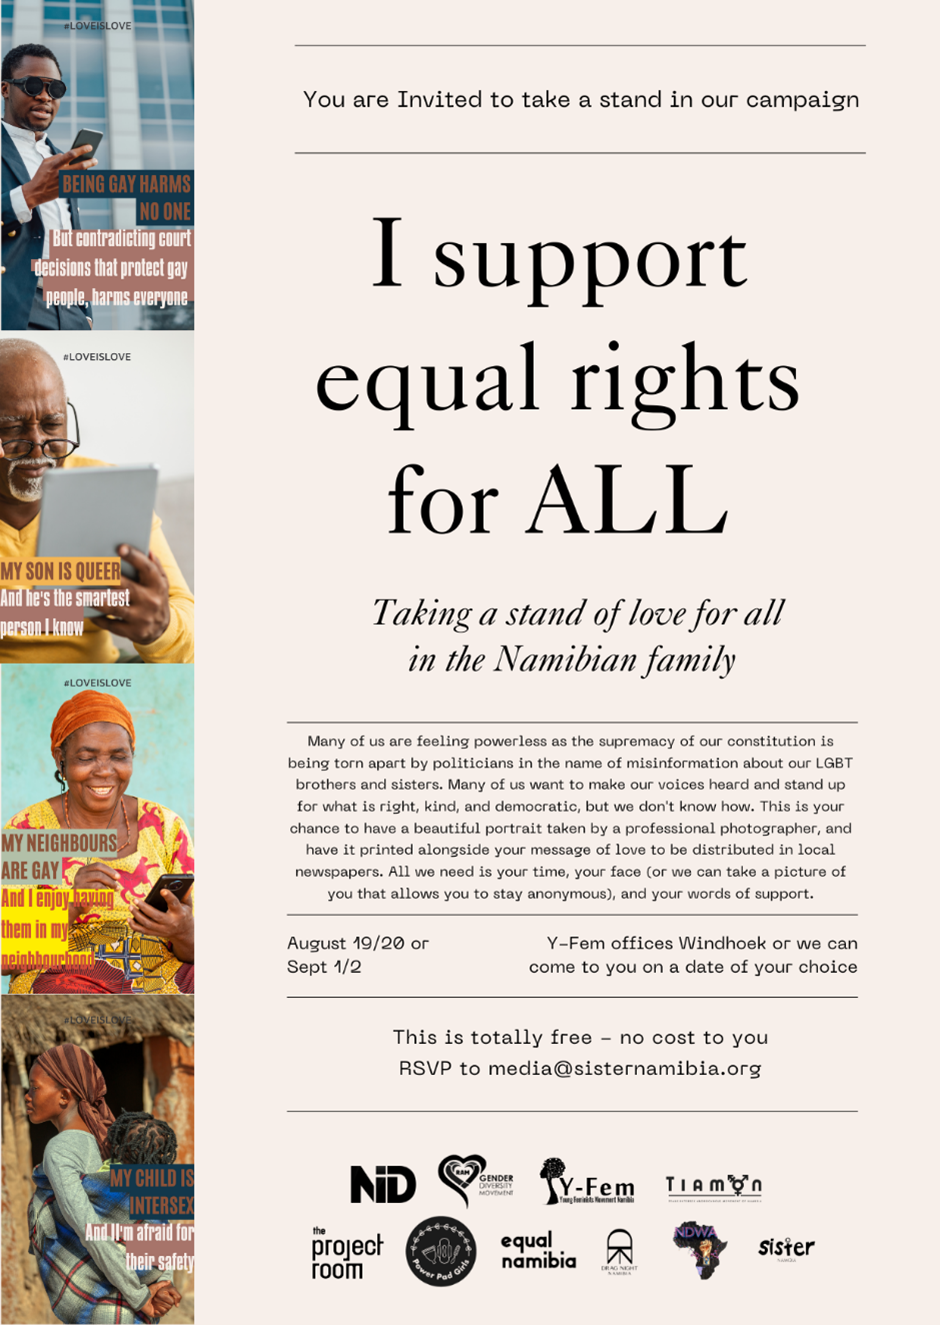 I support equal rights for ALL INVITATION to take a stand in CSOs campaign